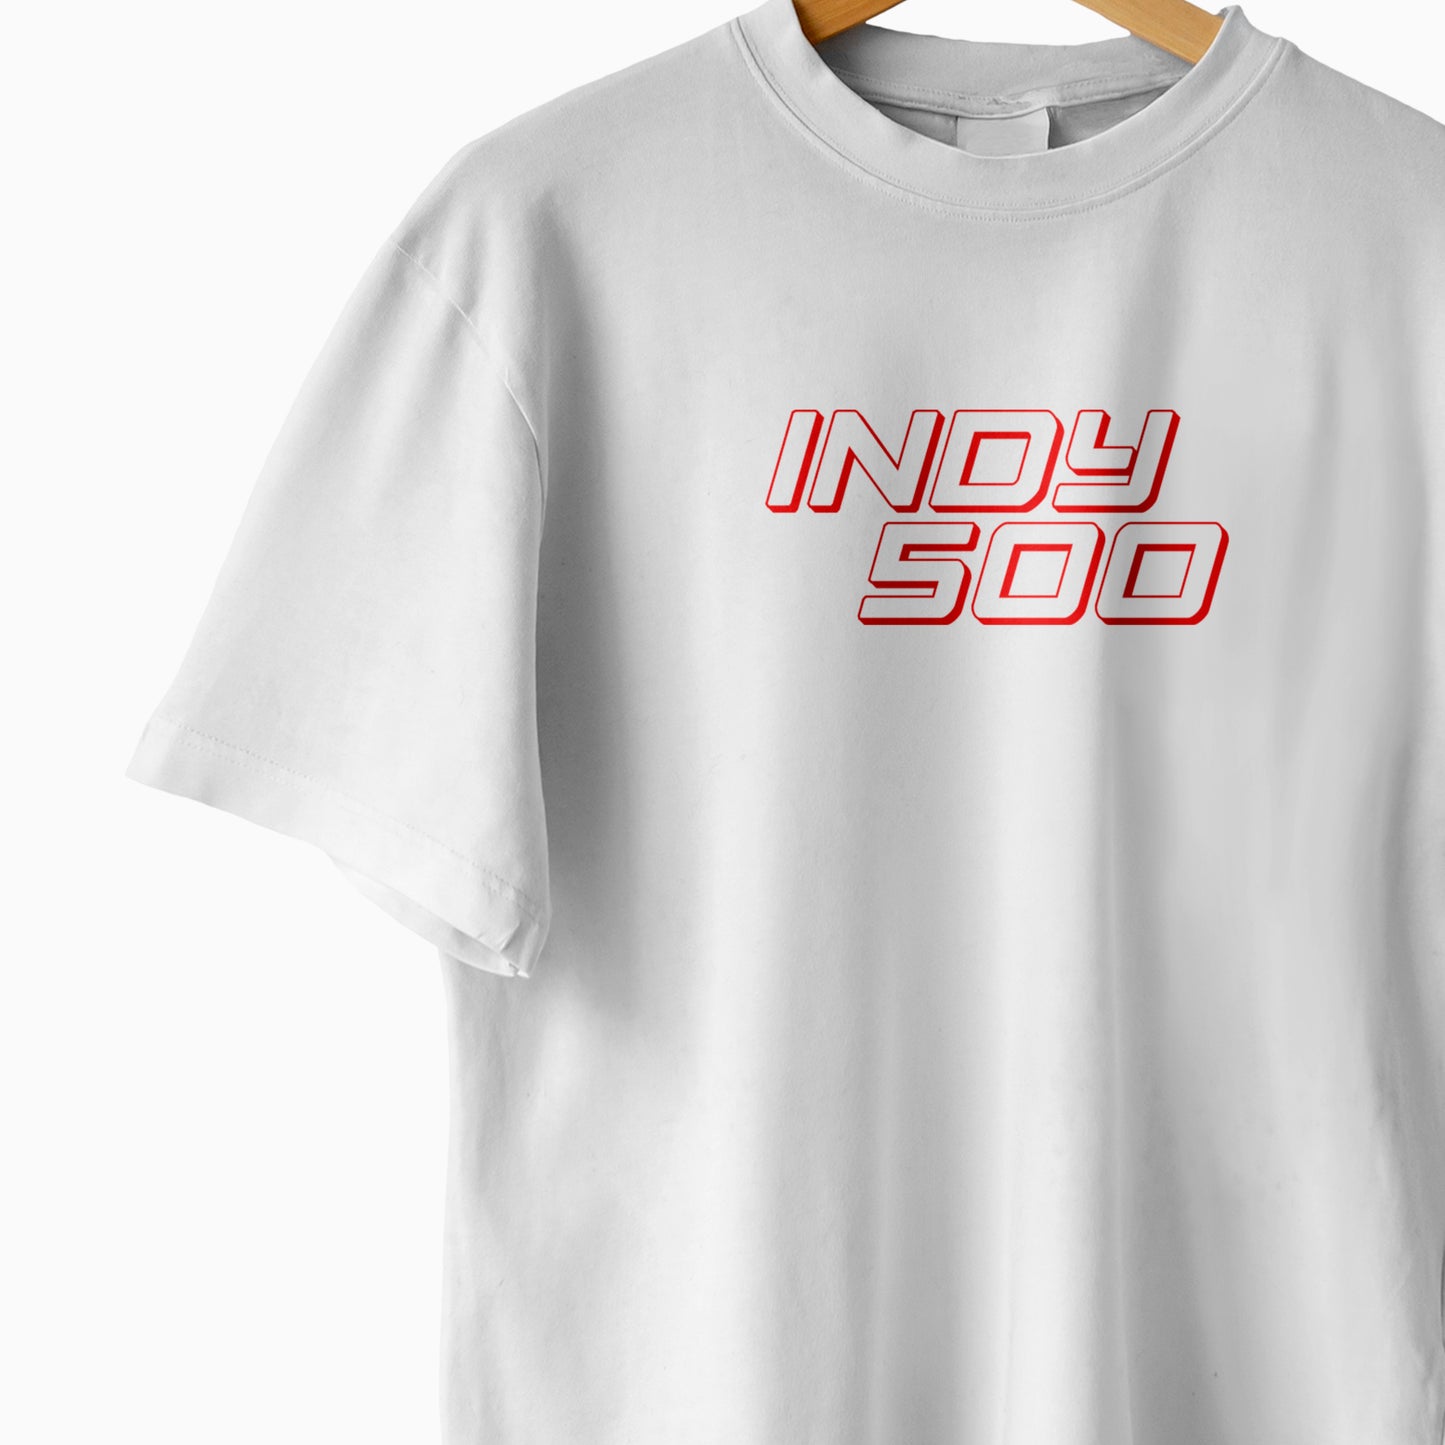 Indy500 White T-shirt